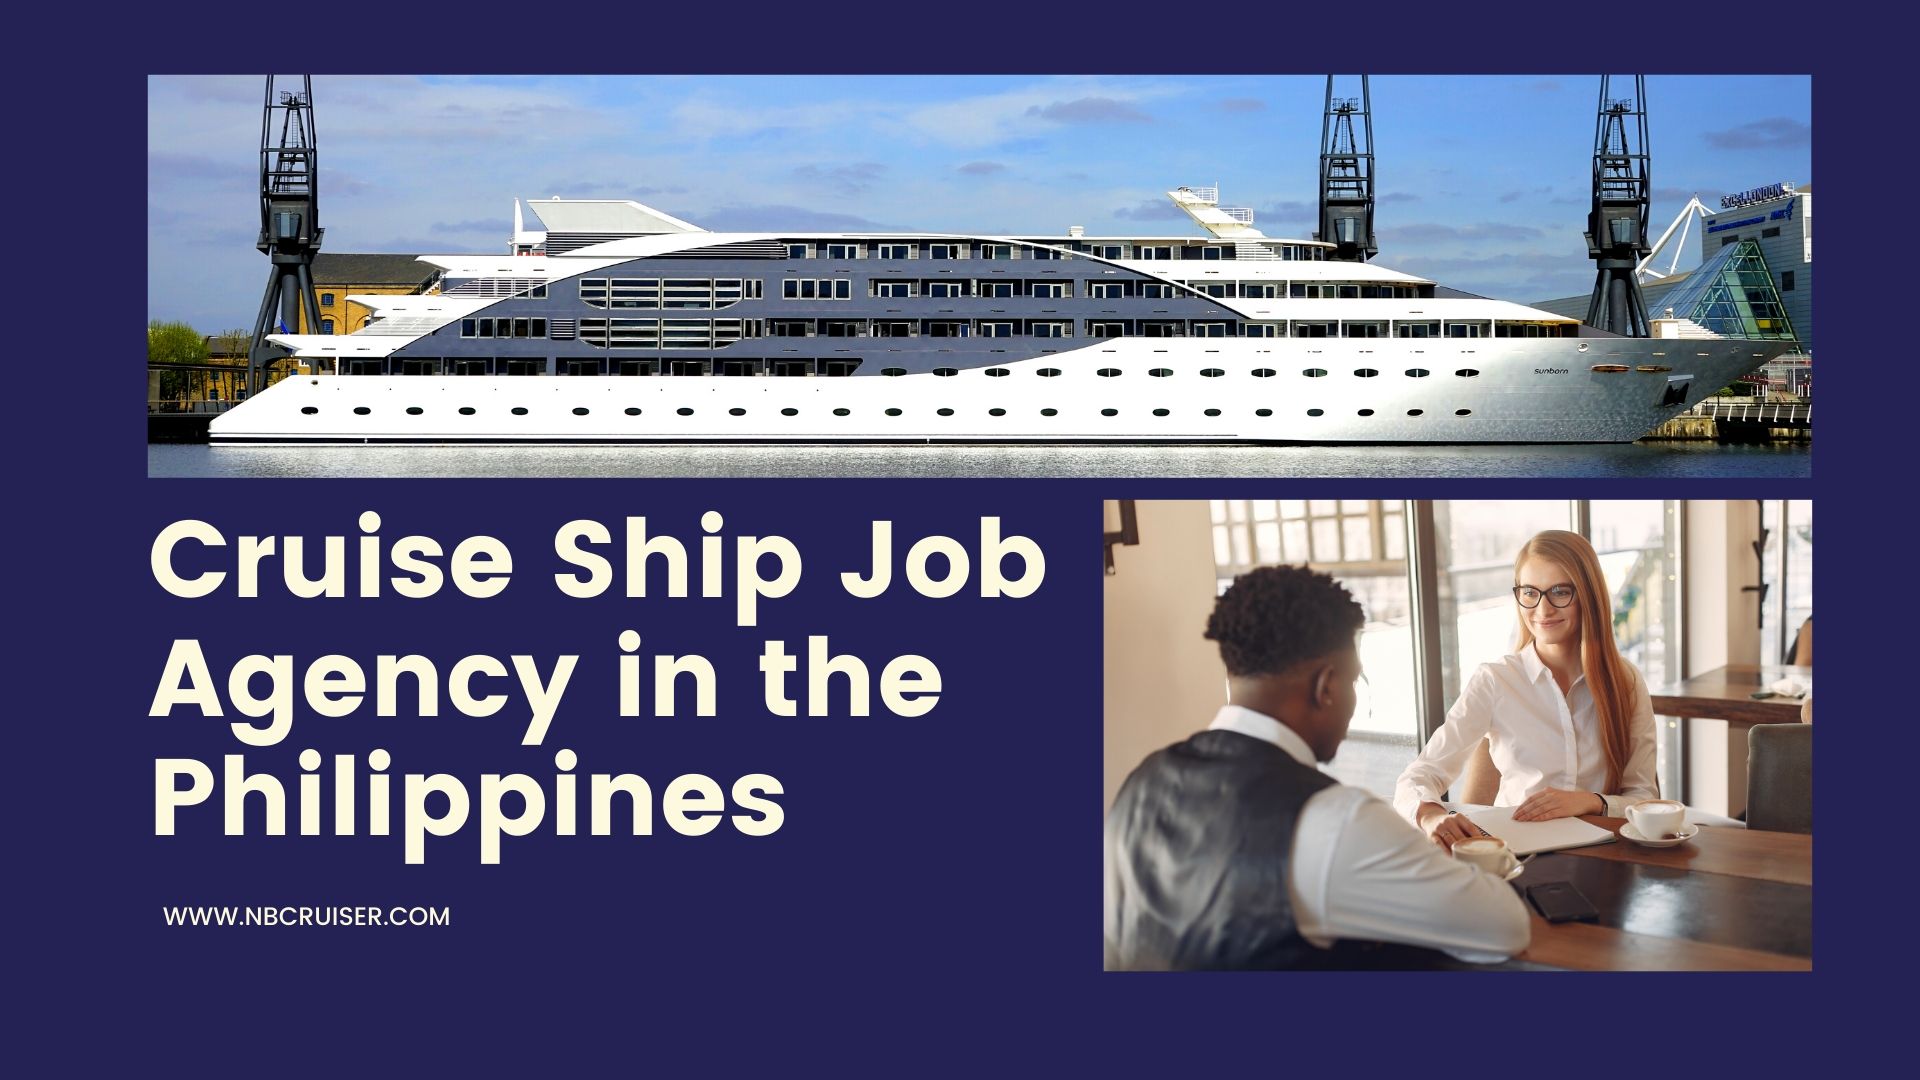 cruise ship hiring in the Philippines Archives - NBCRUISER